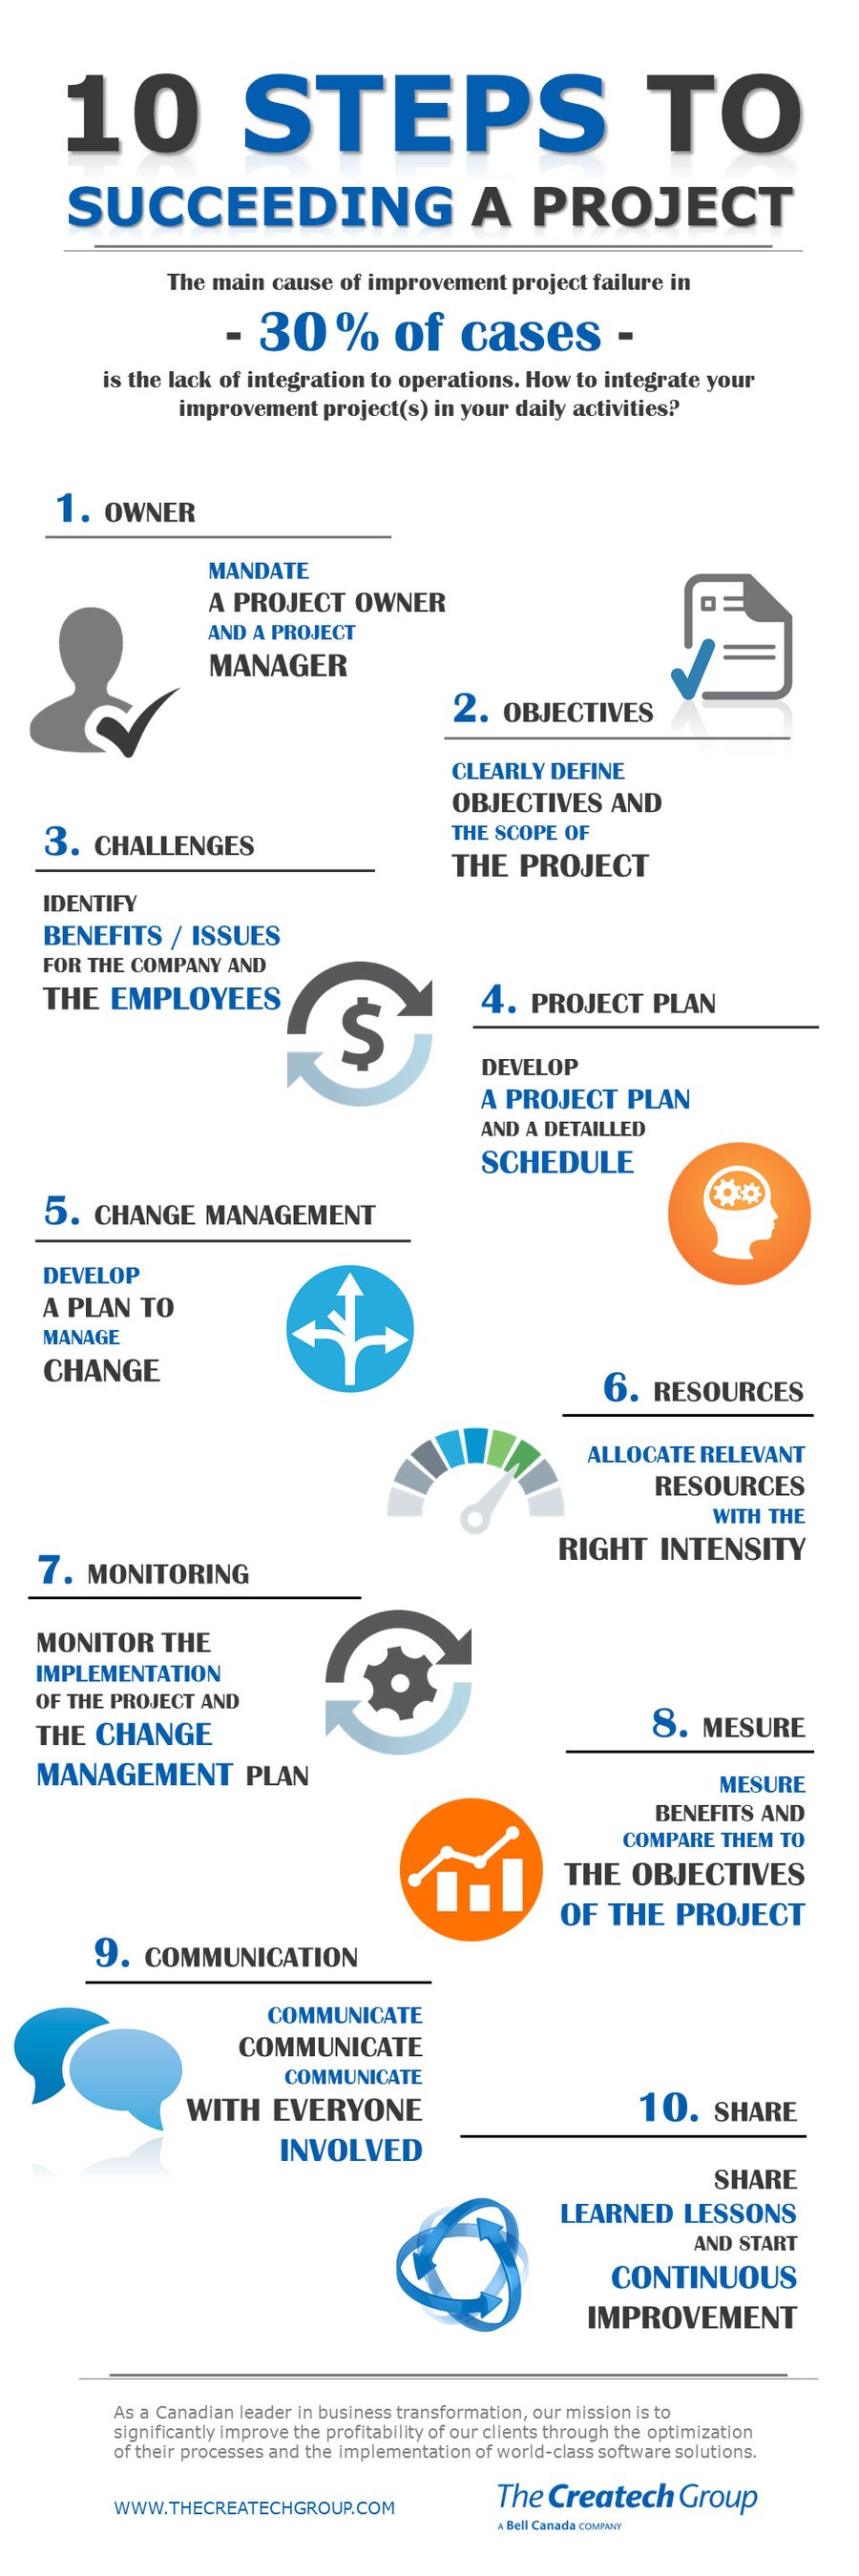 The_Createch_Group_10_steps_to_succeeding_a_project